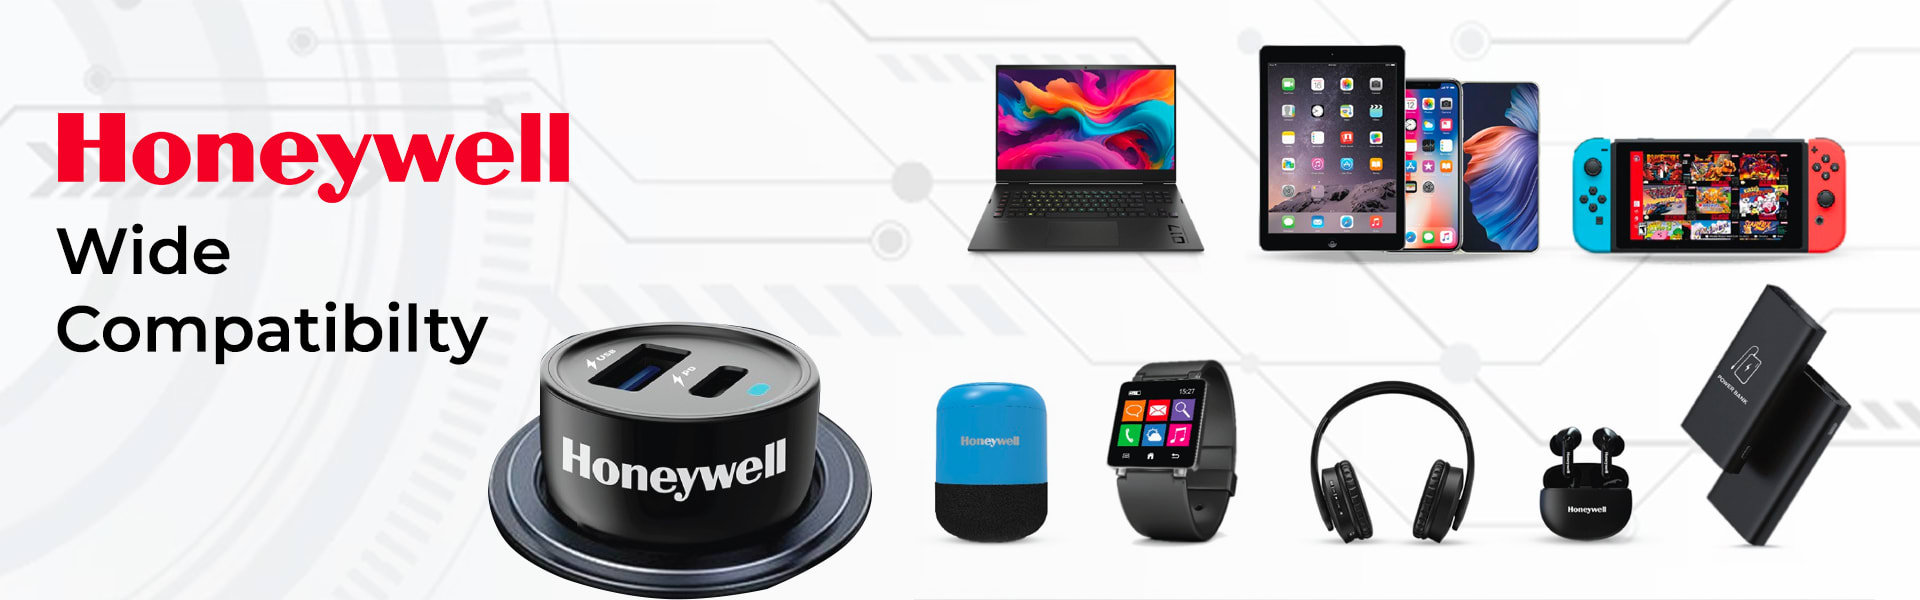 honeywell products